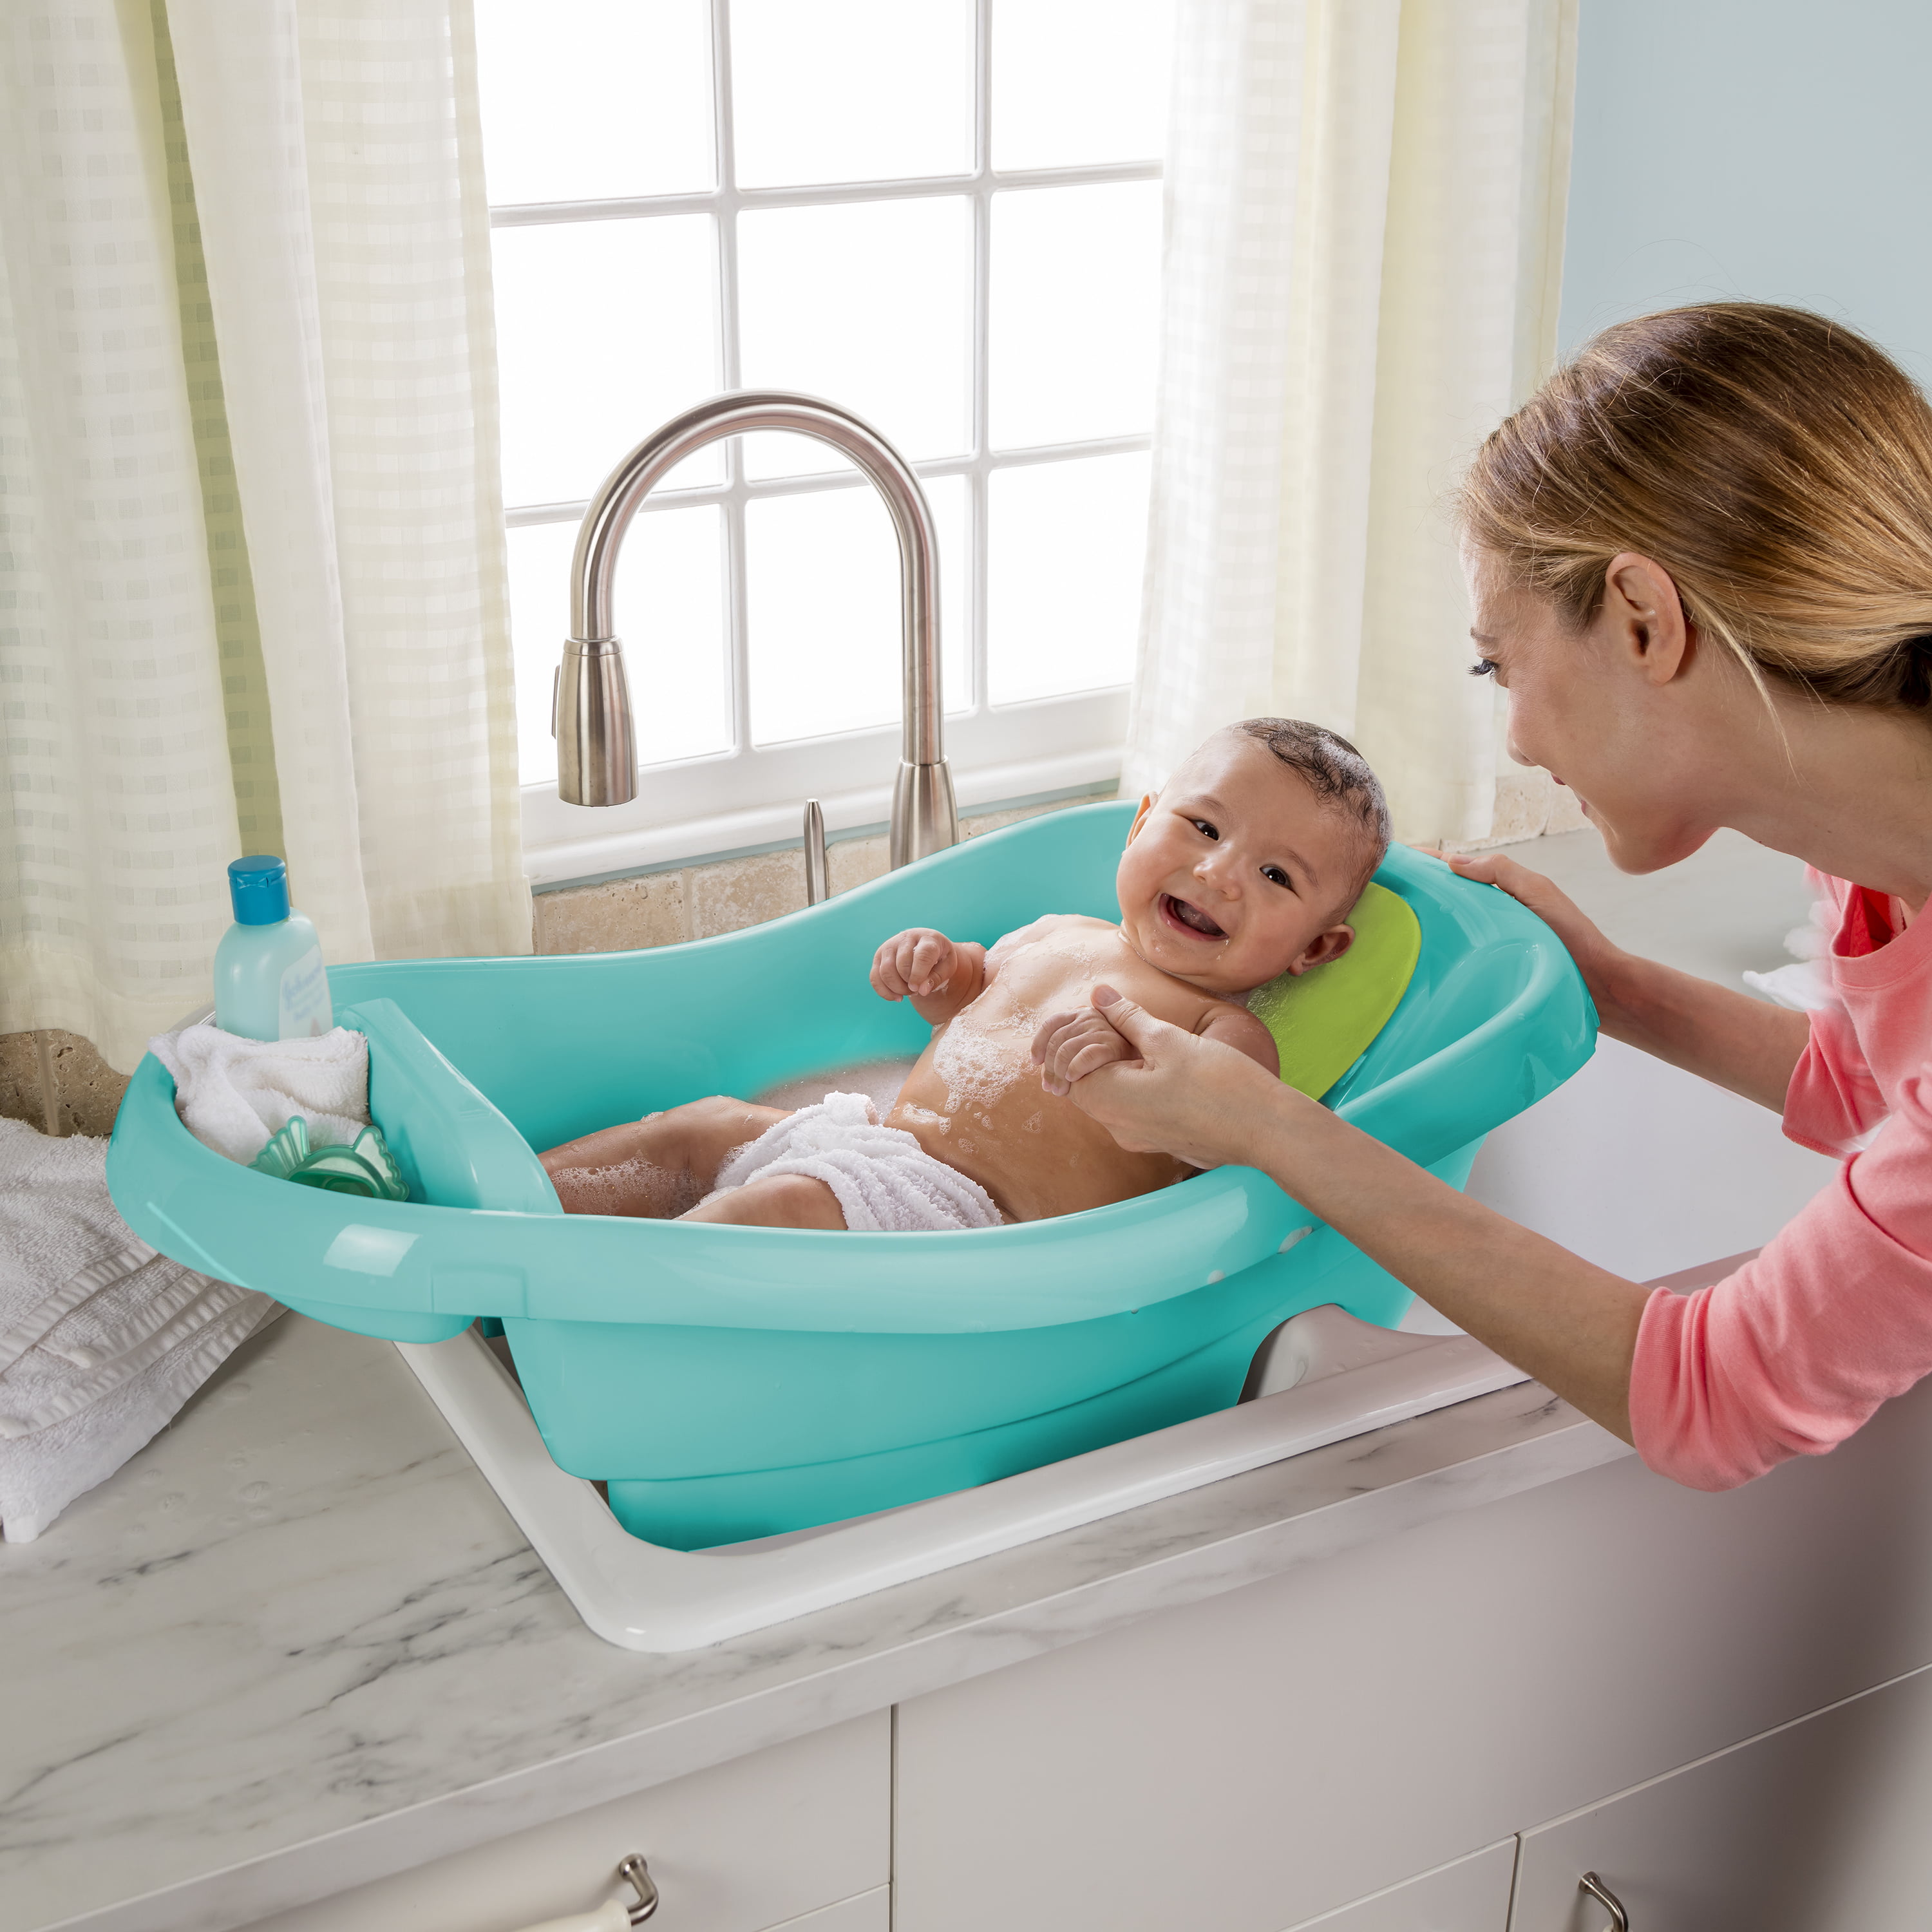 Summer Infant Comfy Clean Deluxe Newborn To Toddler Bath Tub Teal